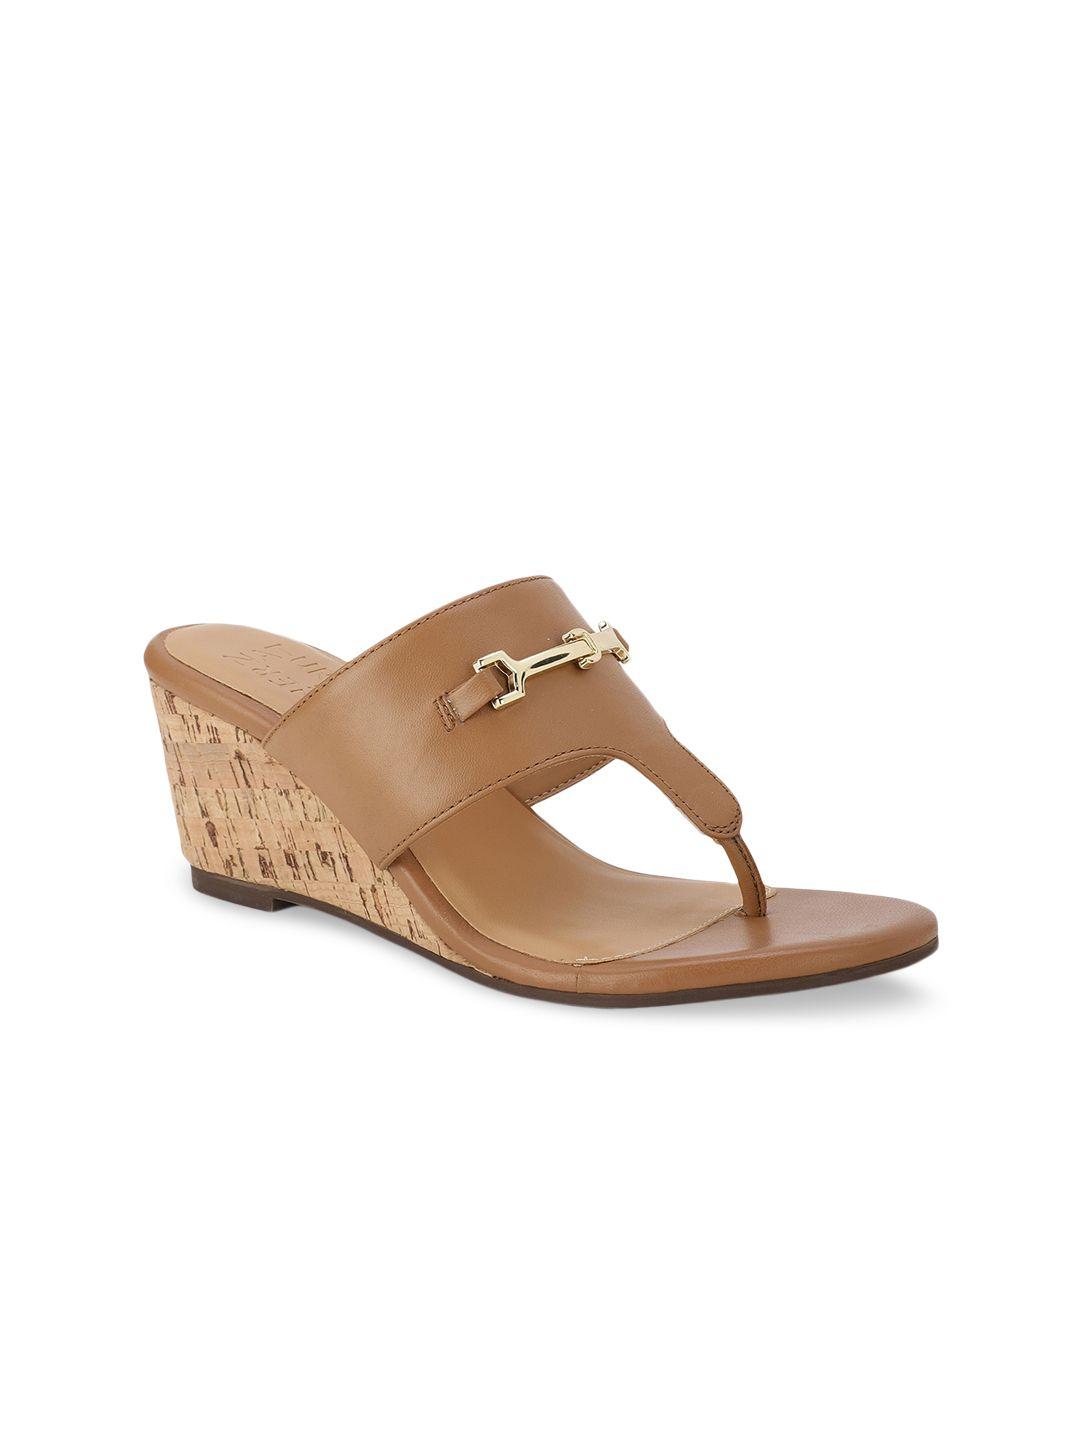 naturalizer beige leather wedge sandals